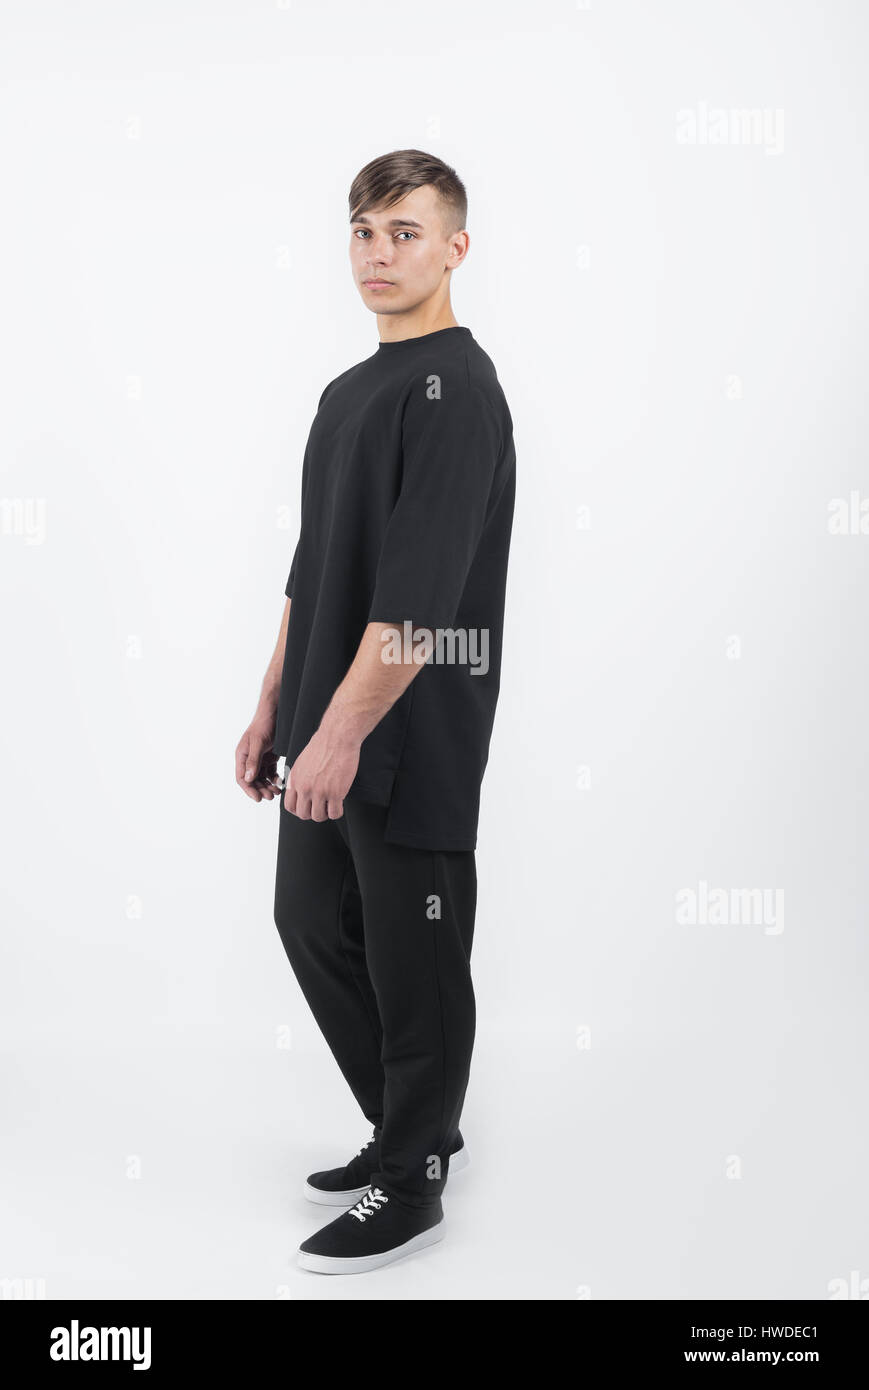 Young muscular man wearing black clothes and sneakers on white background Stock Photo